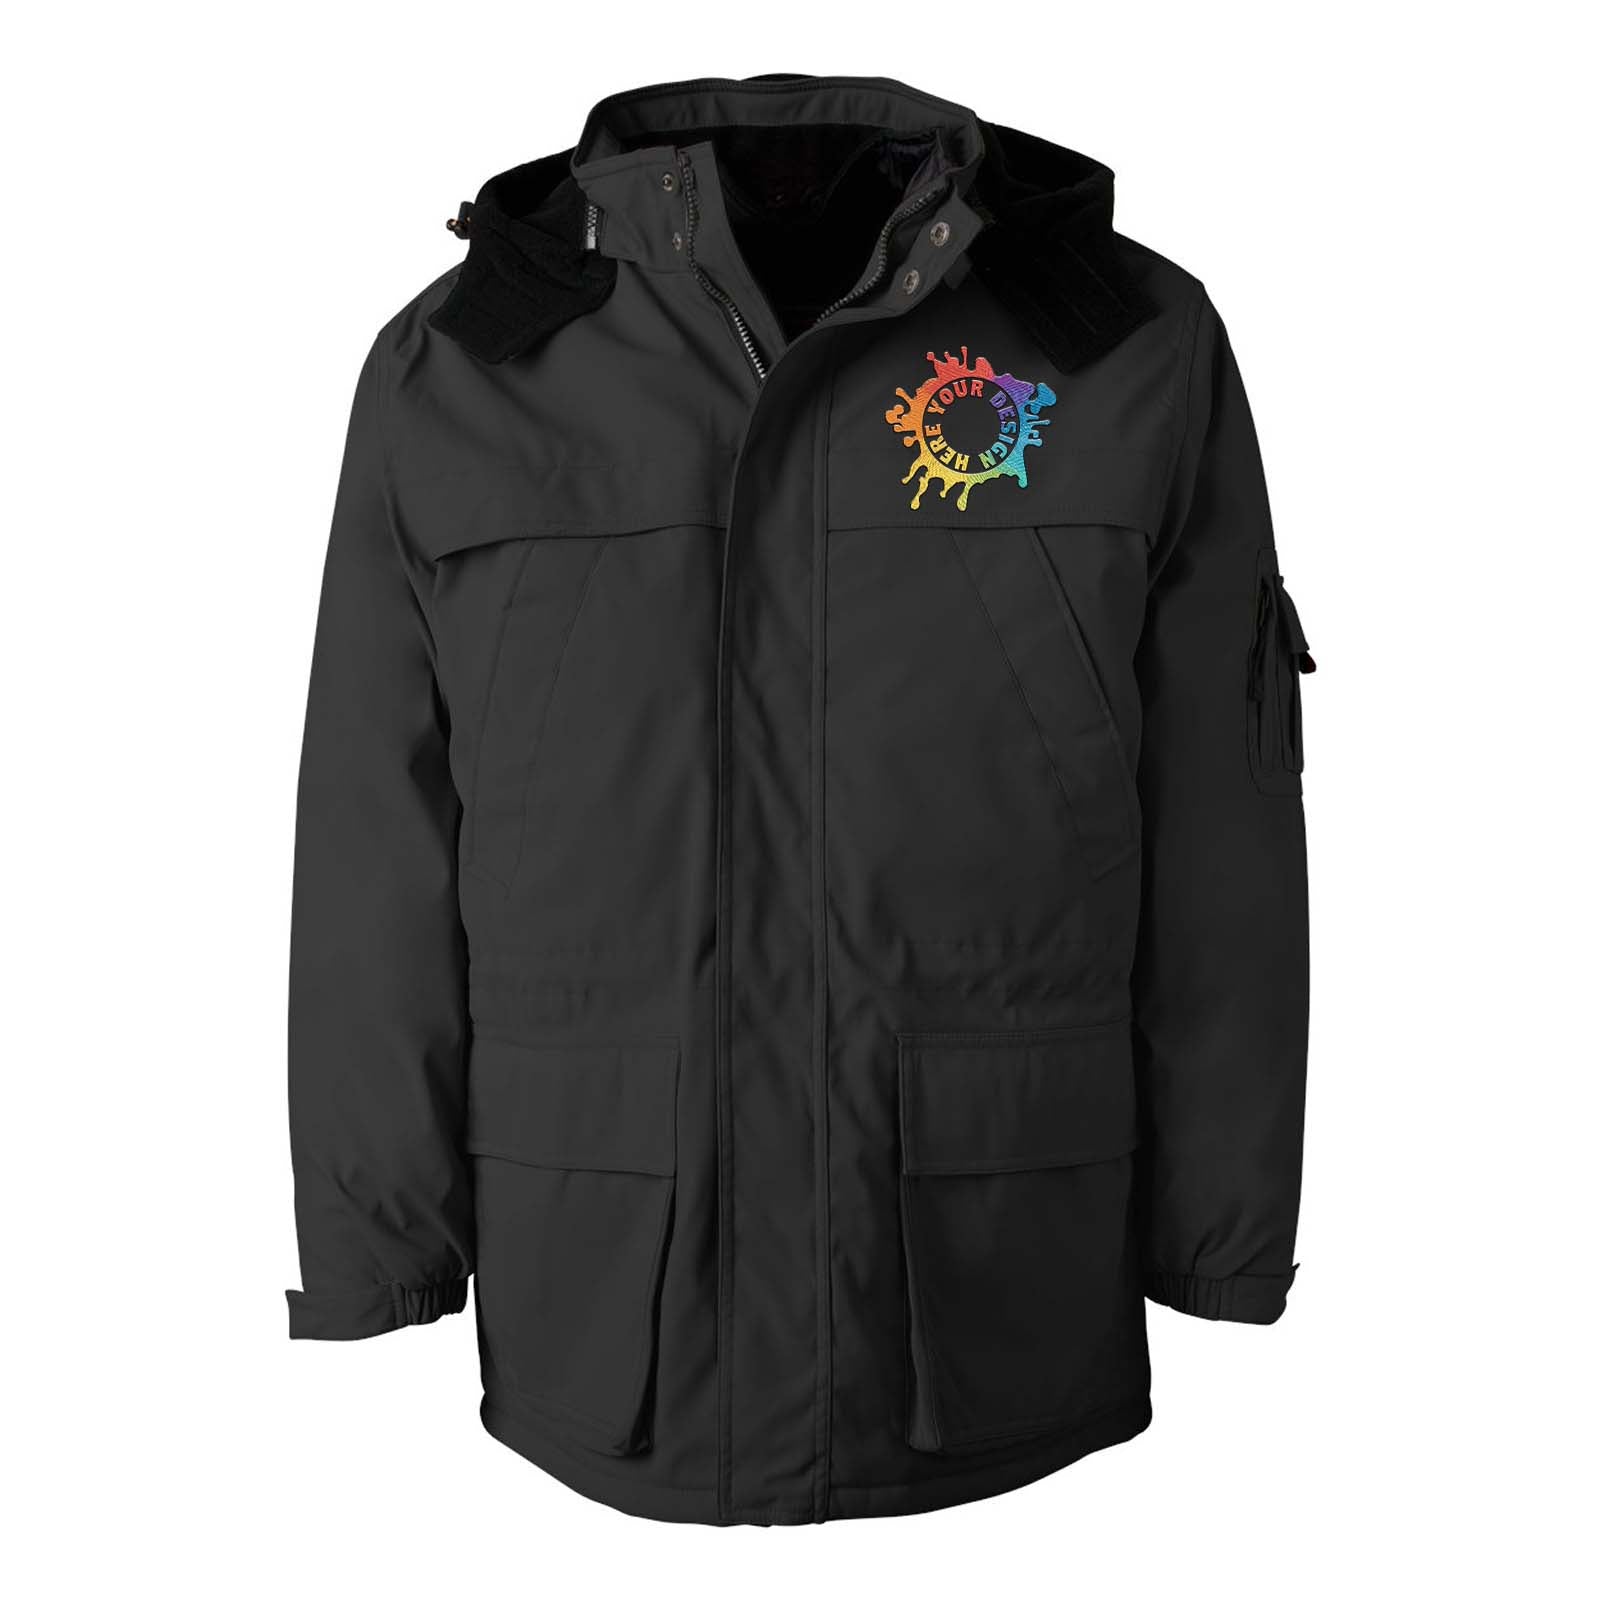 Weatherproof 3-in-1 Systems Jacket Embroidery - Mato & Hash